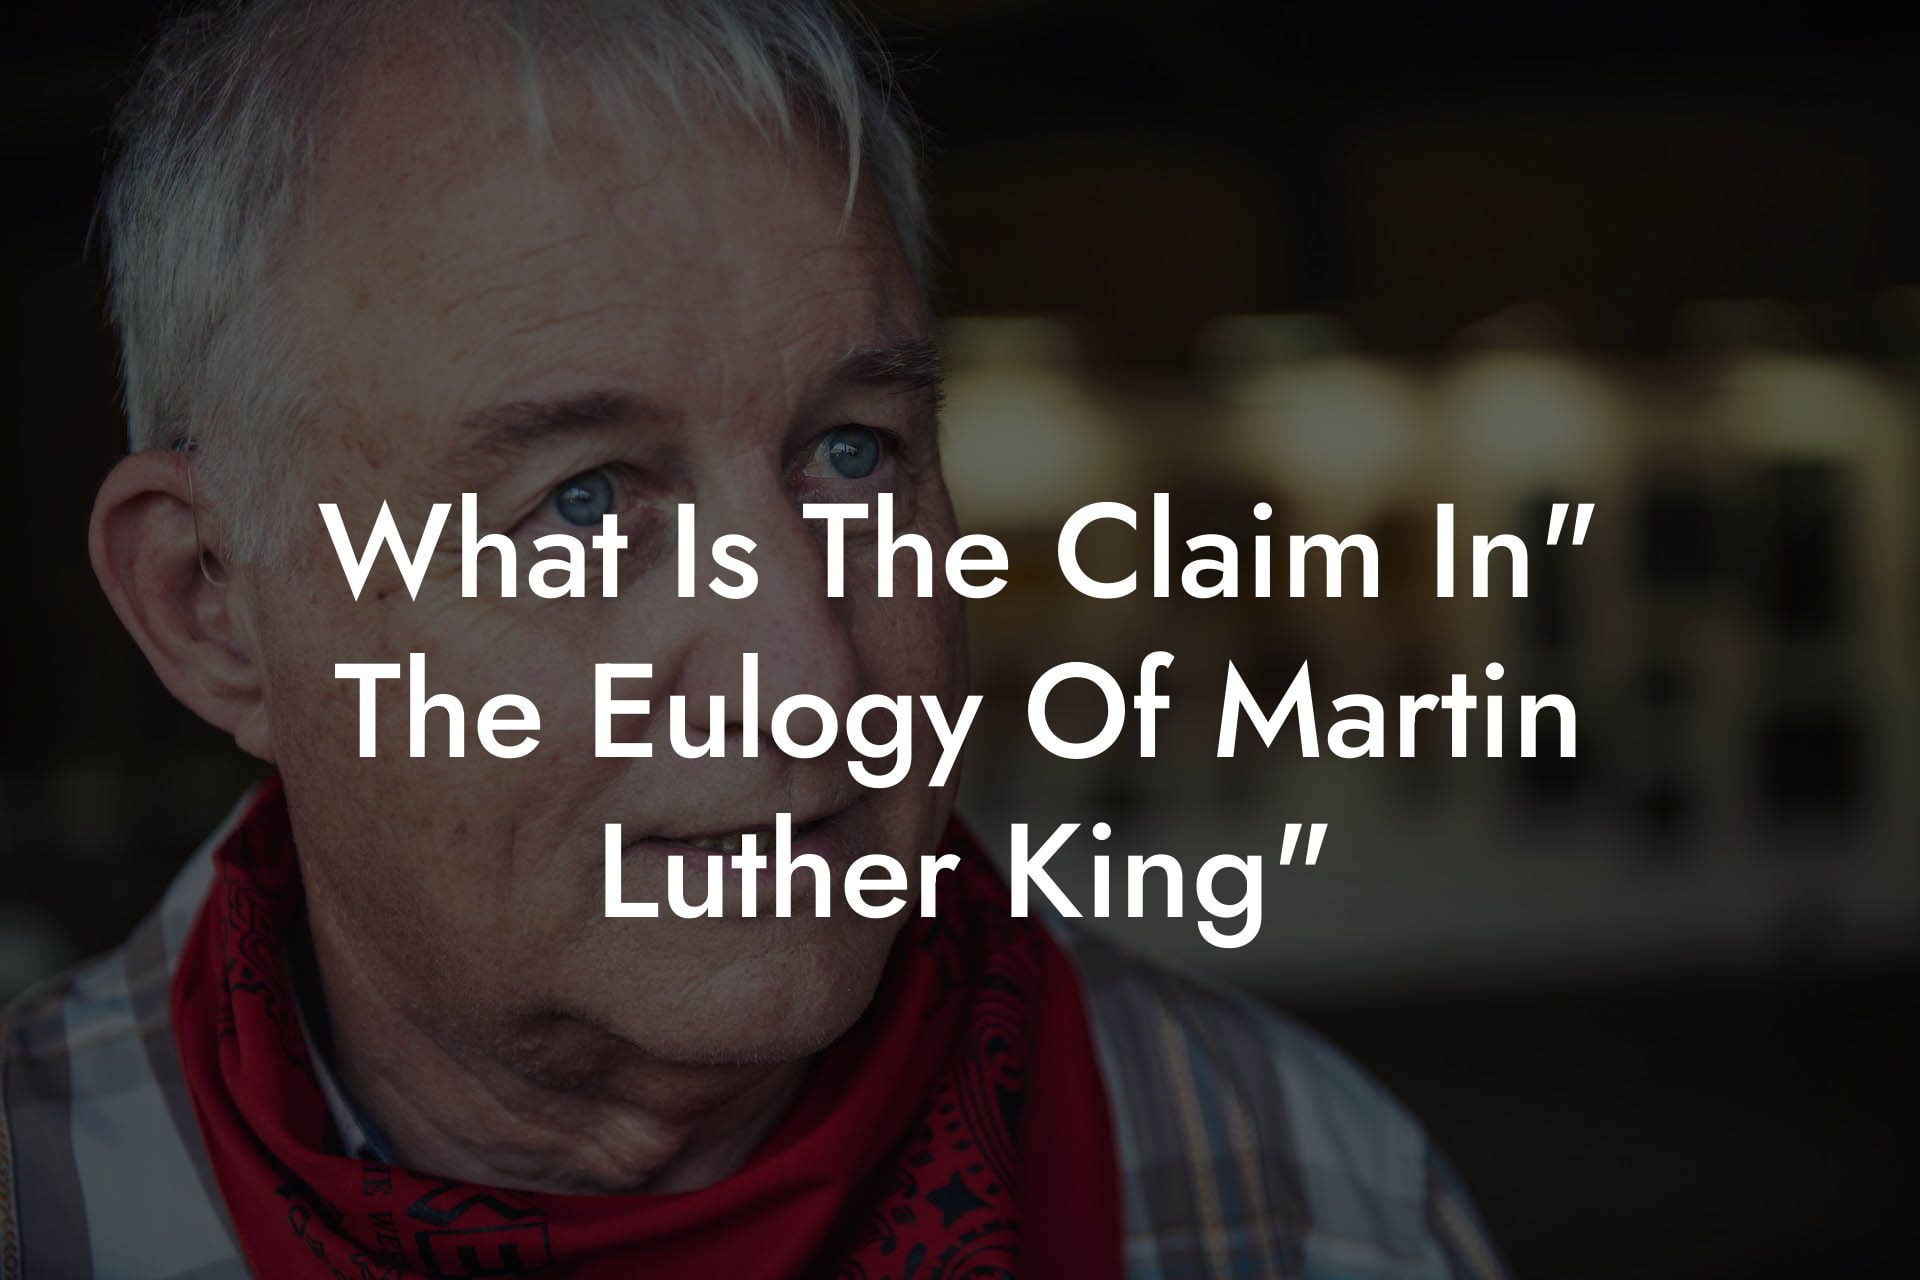 What Is The Claim In" The Eulogy Of Martin Luther King"